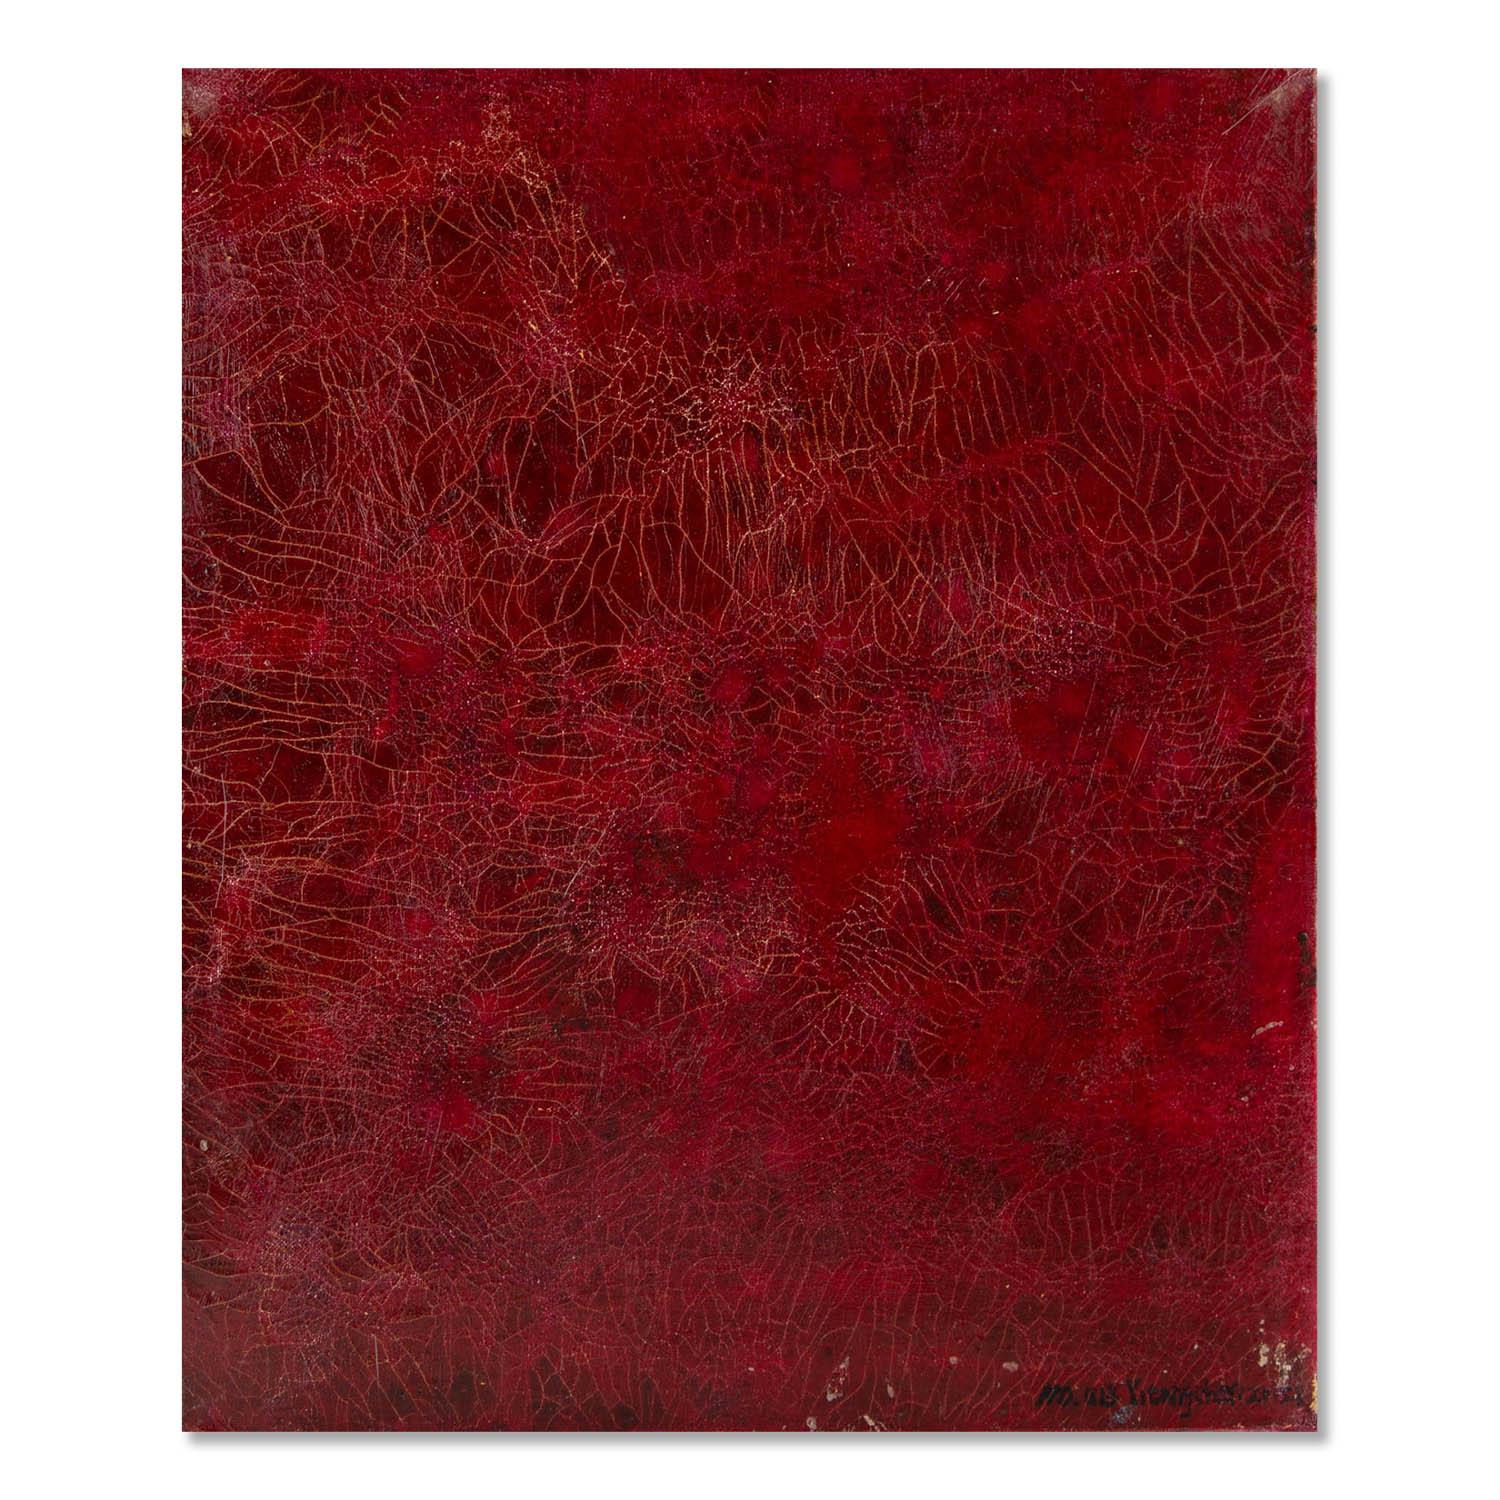  Title: Pattern 13 - Red
 Medium: Oil on canvas
 Size: 23 x 19 inches
 Frame: Framing options available!
 Condition: The painting appears to be in excellent condition.
 
 Year: 2015
 Artist: Jianping Chen
 Signature: Signed
 Signature Location: